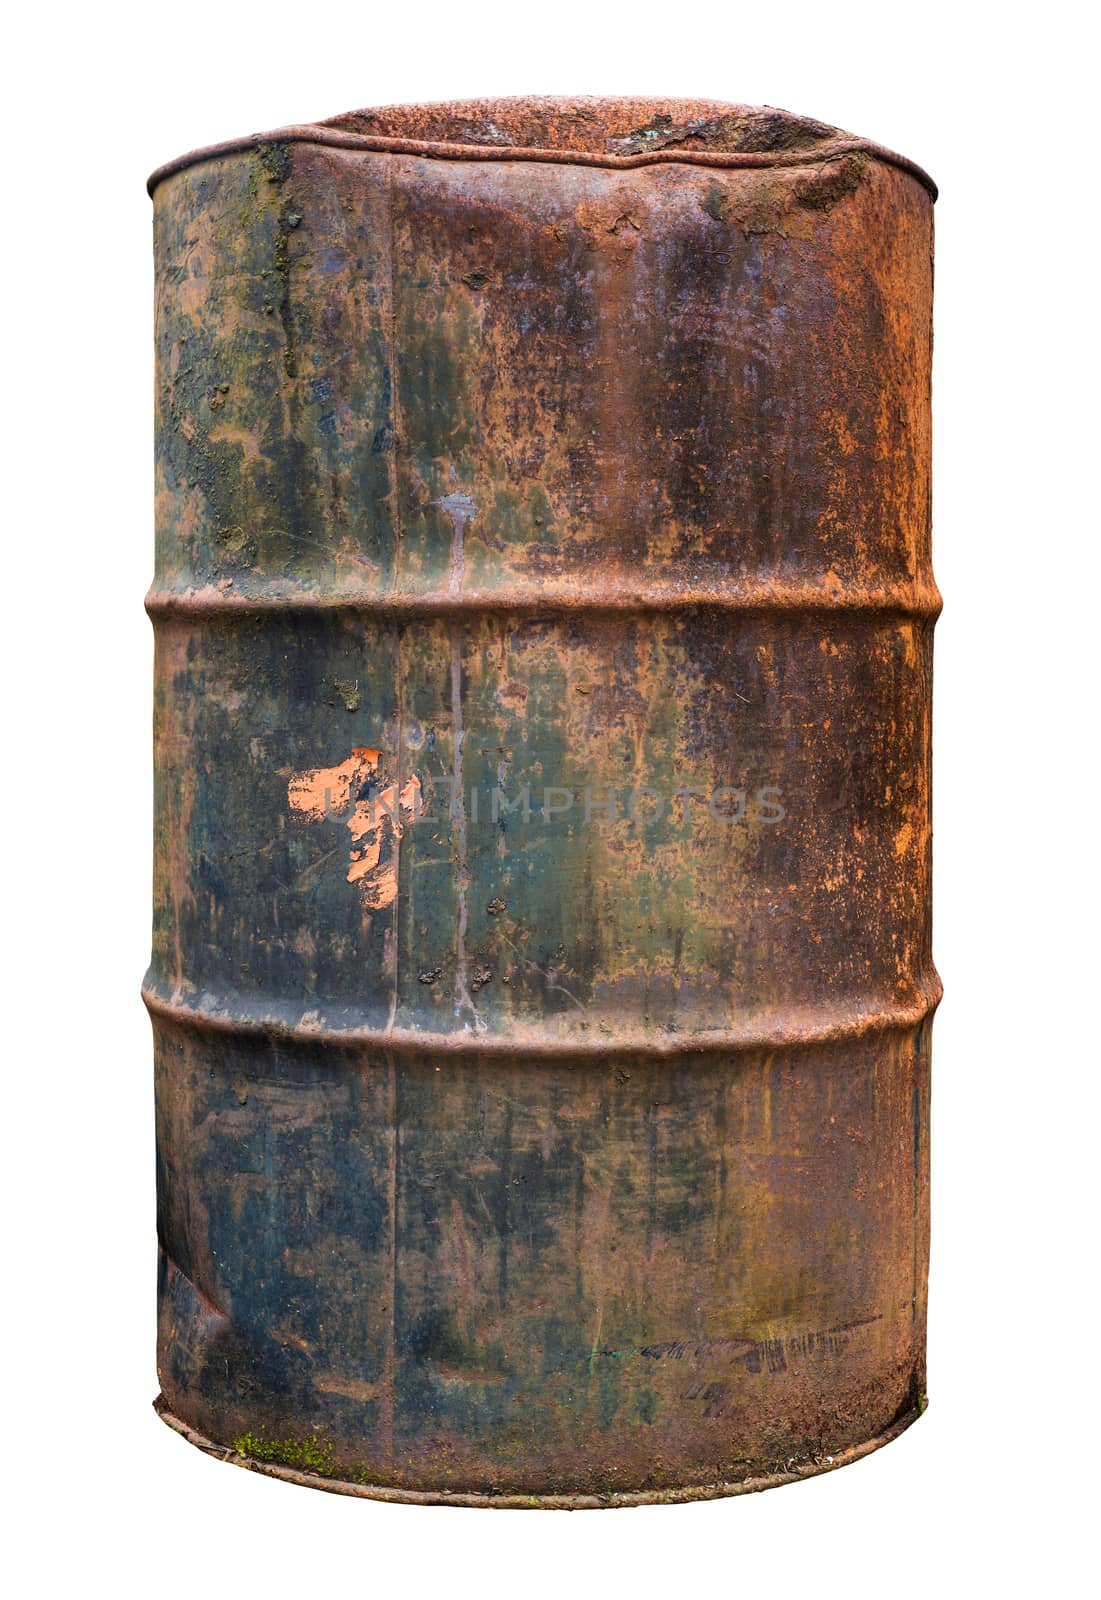 Isolated Rusty Old Barrel by mrdoomits